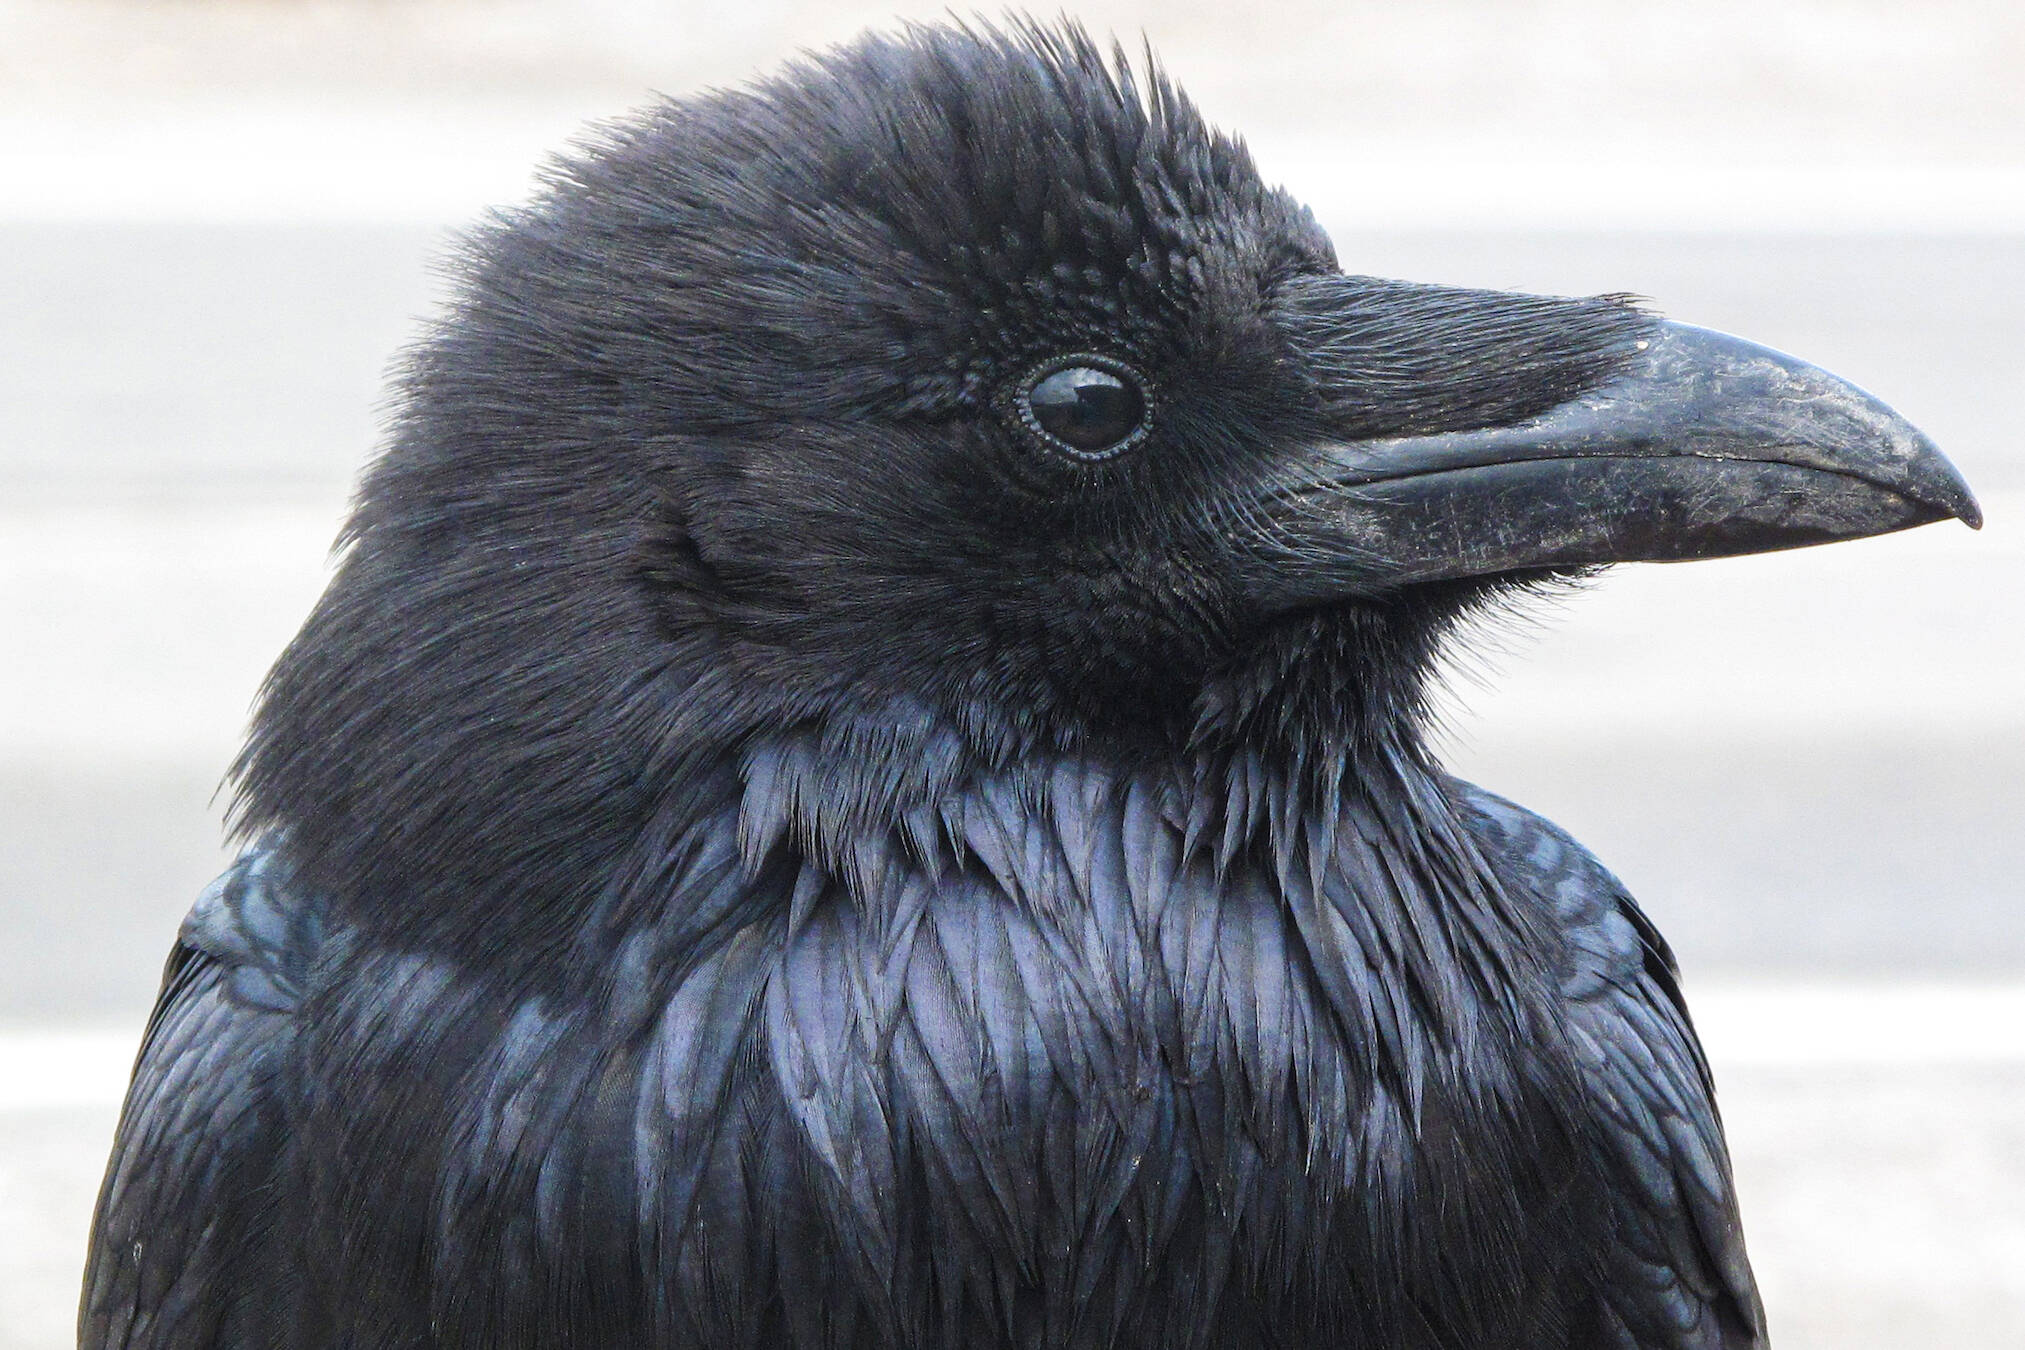 Ravens like this one inspire people to respond to their calls, and sometimes to pick up a pencil. (Courtesy Photo / Ned Rozell)